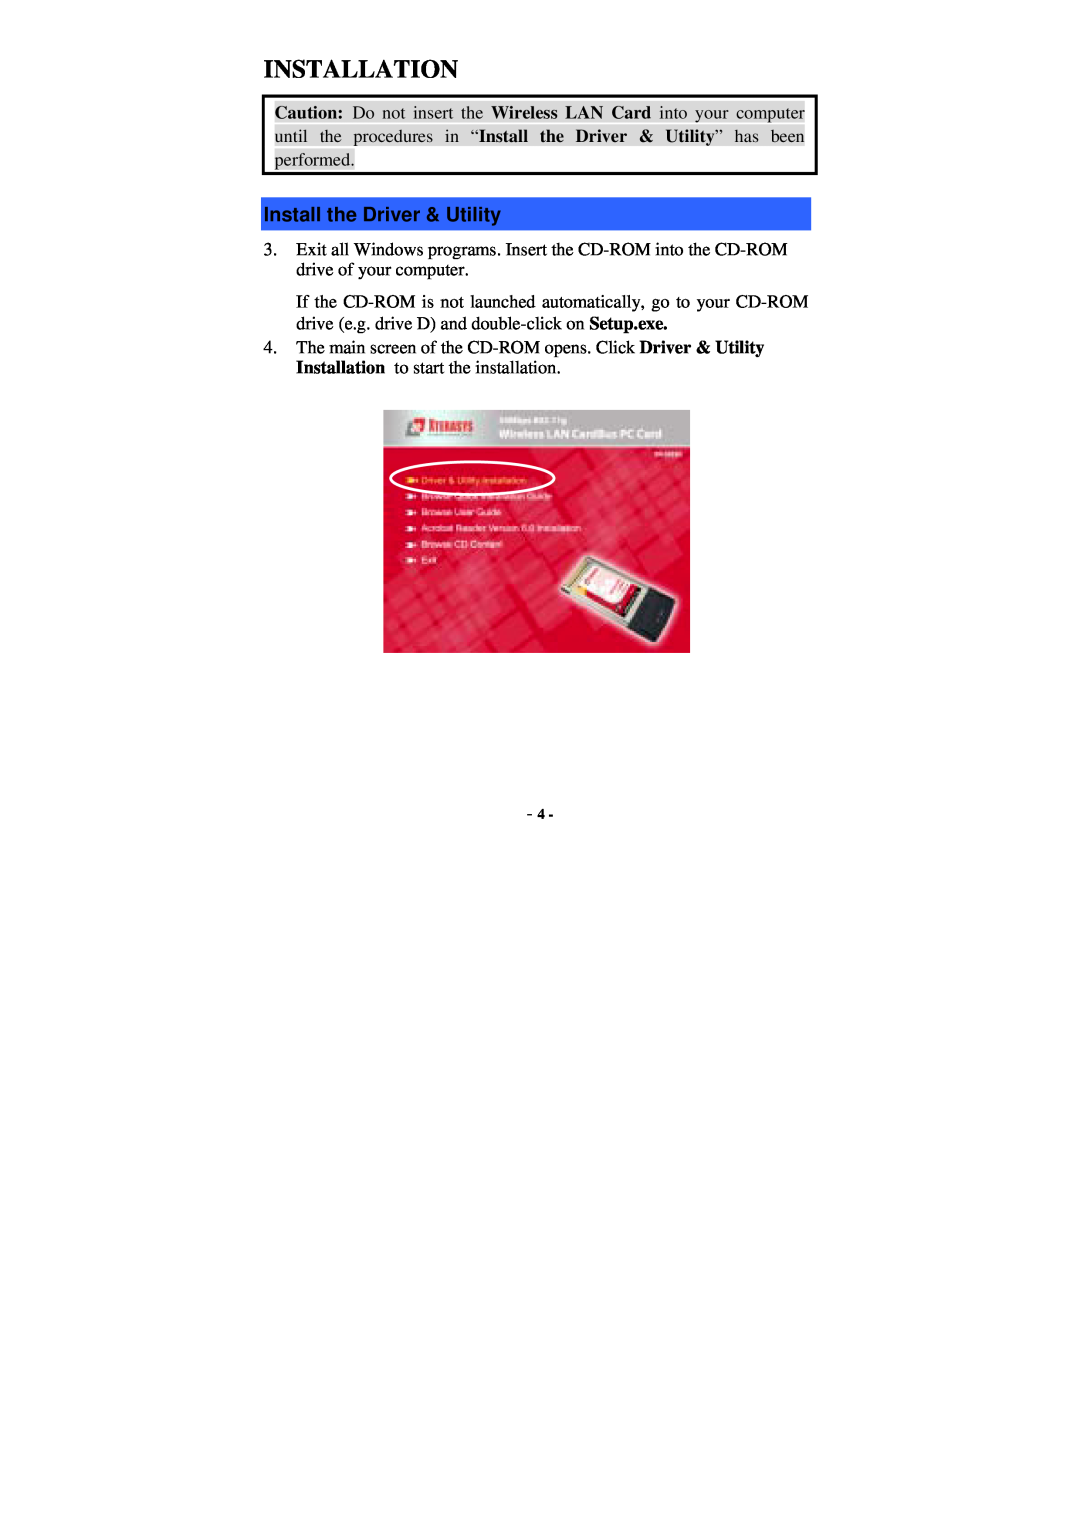 Xterasys Wireless LAN Card user manual Installation, Install the Driver & Utility 